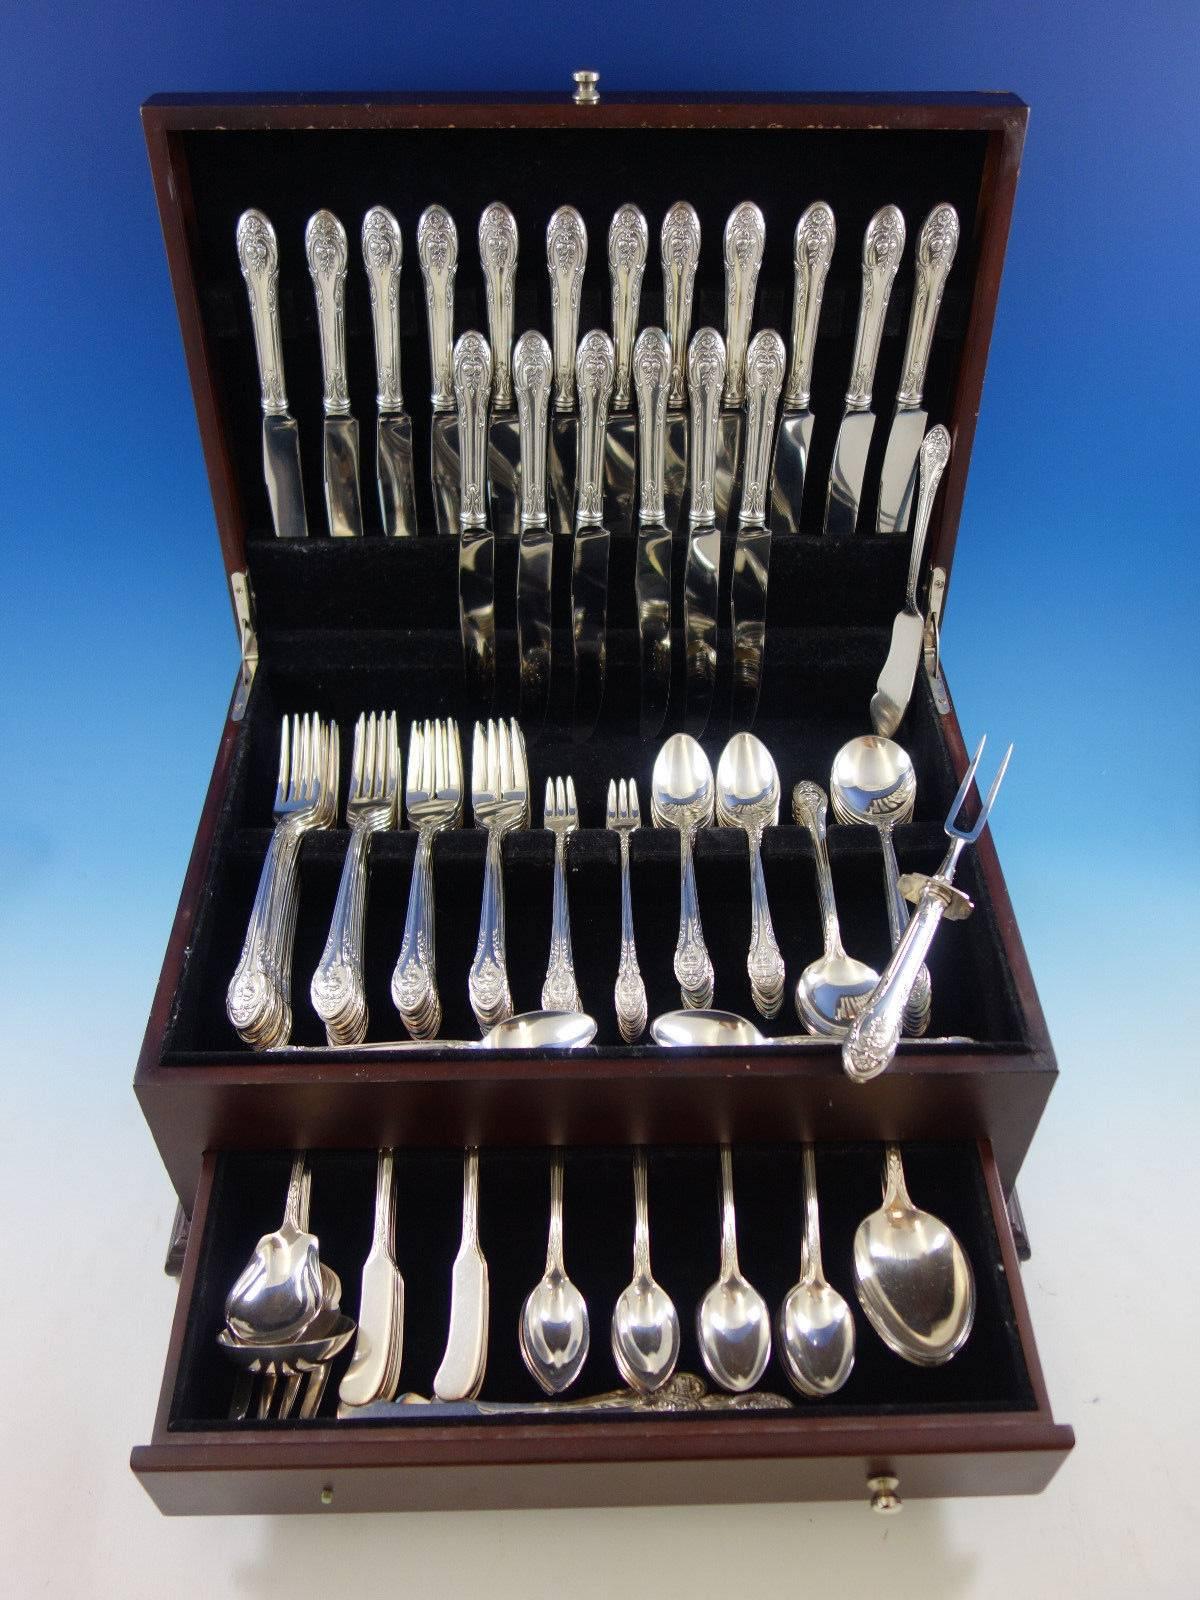 Rosemont by Gorham silver plate flatware set, circa 1930 with rose motif, 190 pieces. This set includes: 18 knives, 8 3/4